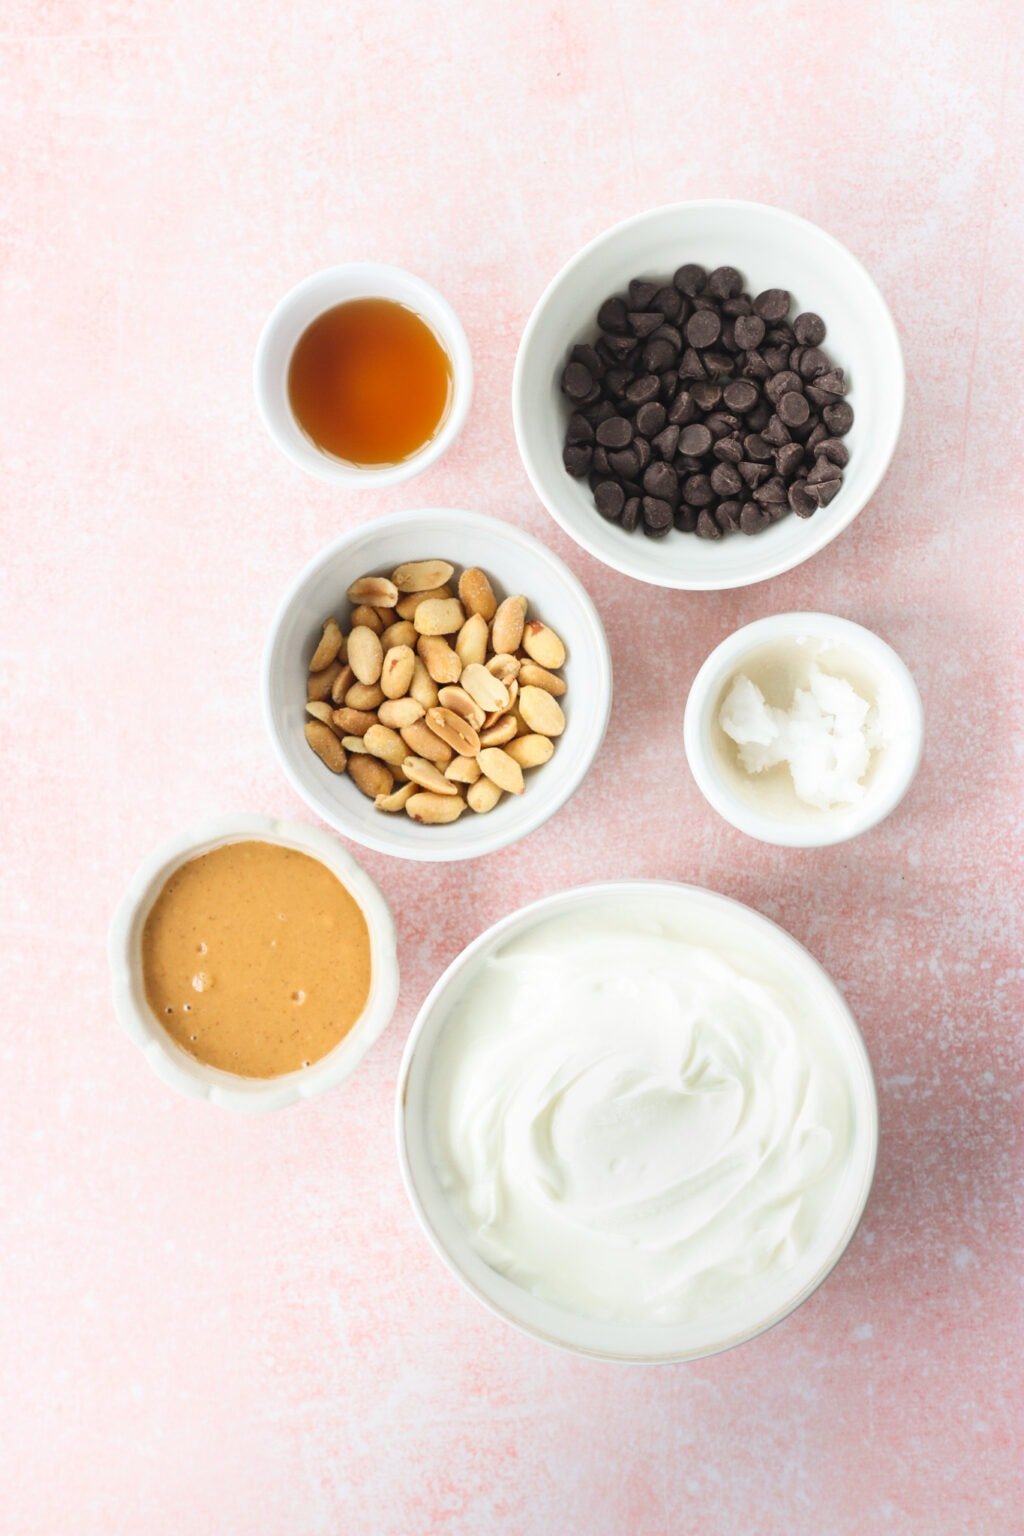 Ingredients for Peanut Butter & Greek Yogurt Cups with Magic Chocolate Shell in small white bowls on a pink marble counter, including Greek yogurt, smooth peanut butter, maple syrup, salted toasted peanuts, chocolate, coconut oil